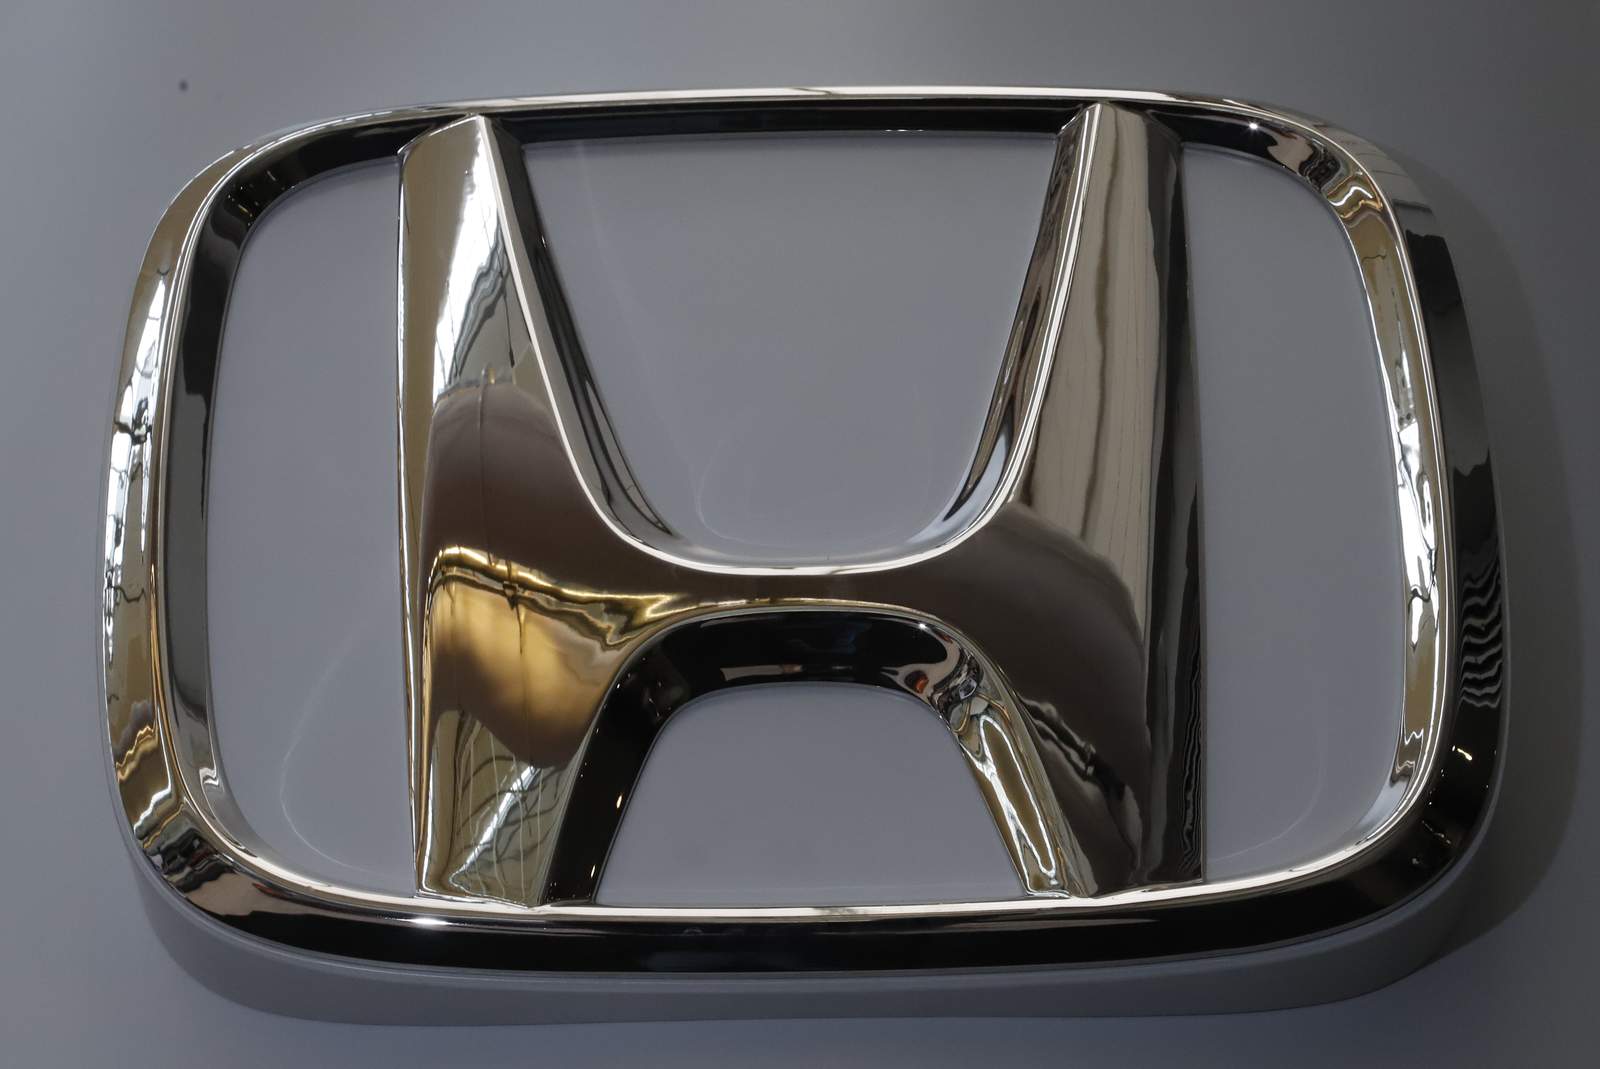 Honda recalls 1.4M US vehicles for software, other problems